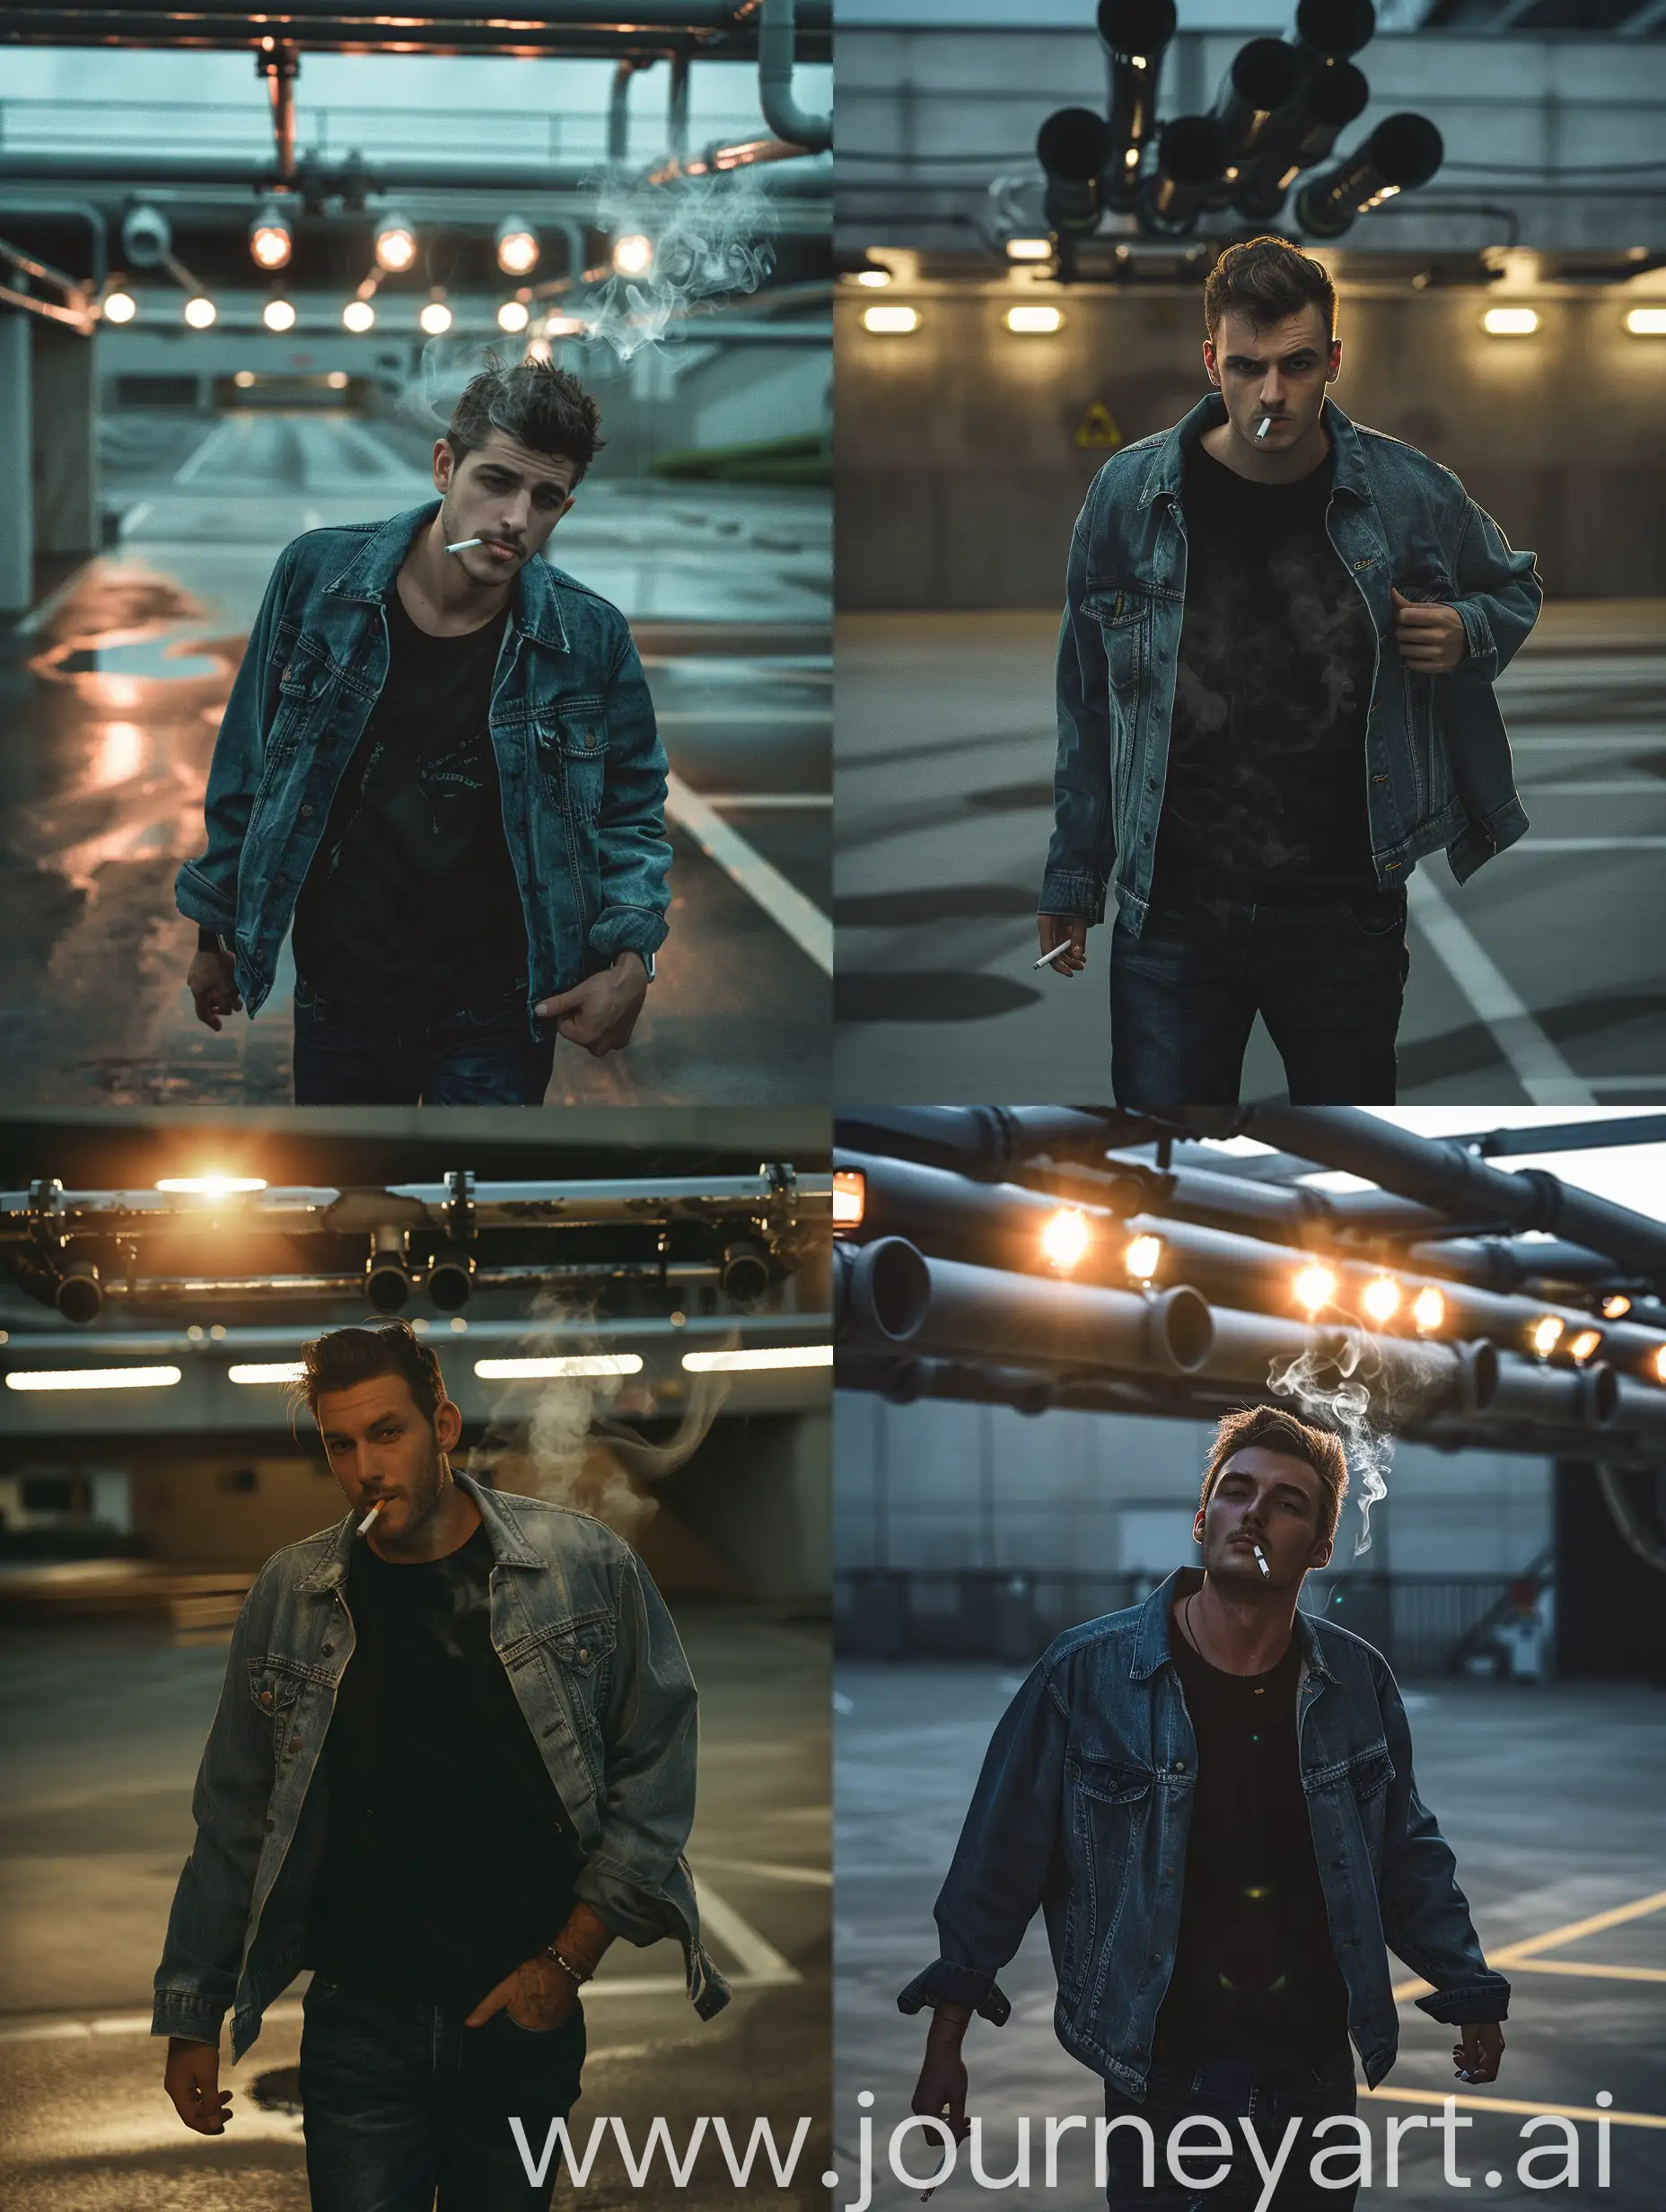 Cinematic, man walking toward the camera, in a parking lot, pipes above his head, lights shining from the back, he wears a denim jacket, black t shirt, smoking a cigarette, caputred by Nikon camera, moody atmosphere, one of his hands in jacket pocket, photorealistic, intricate details